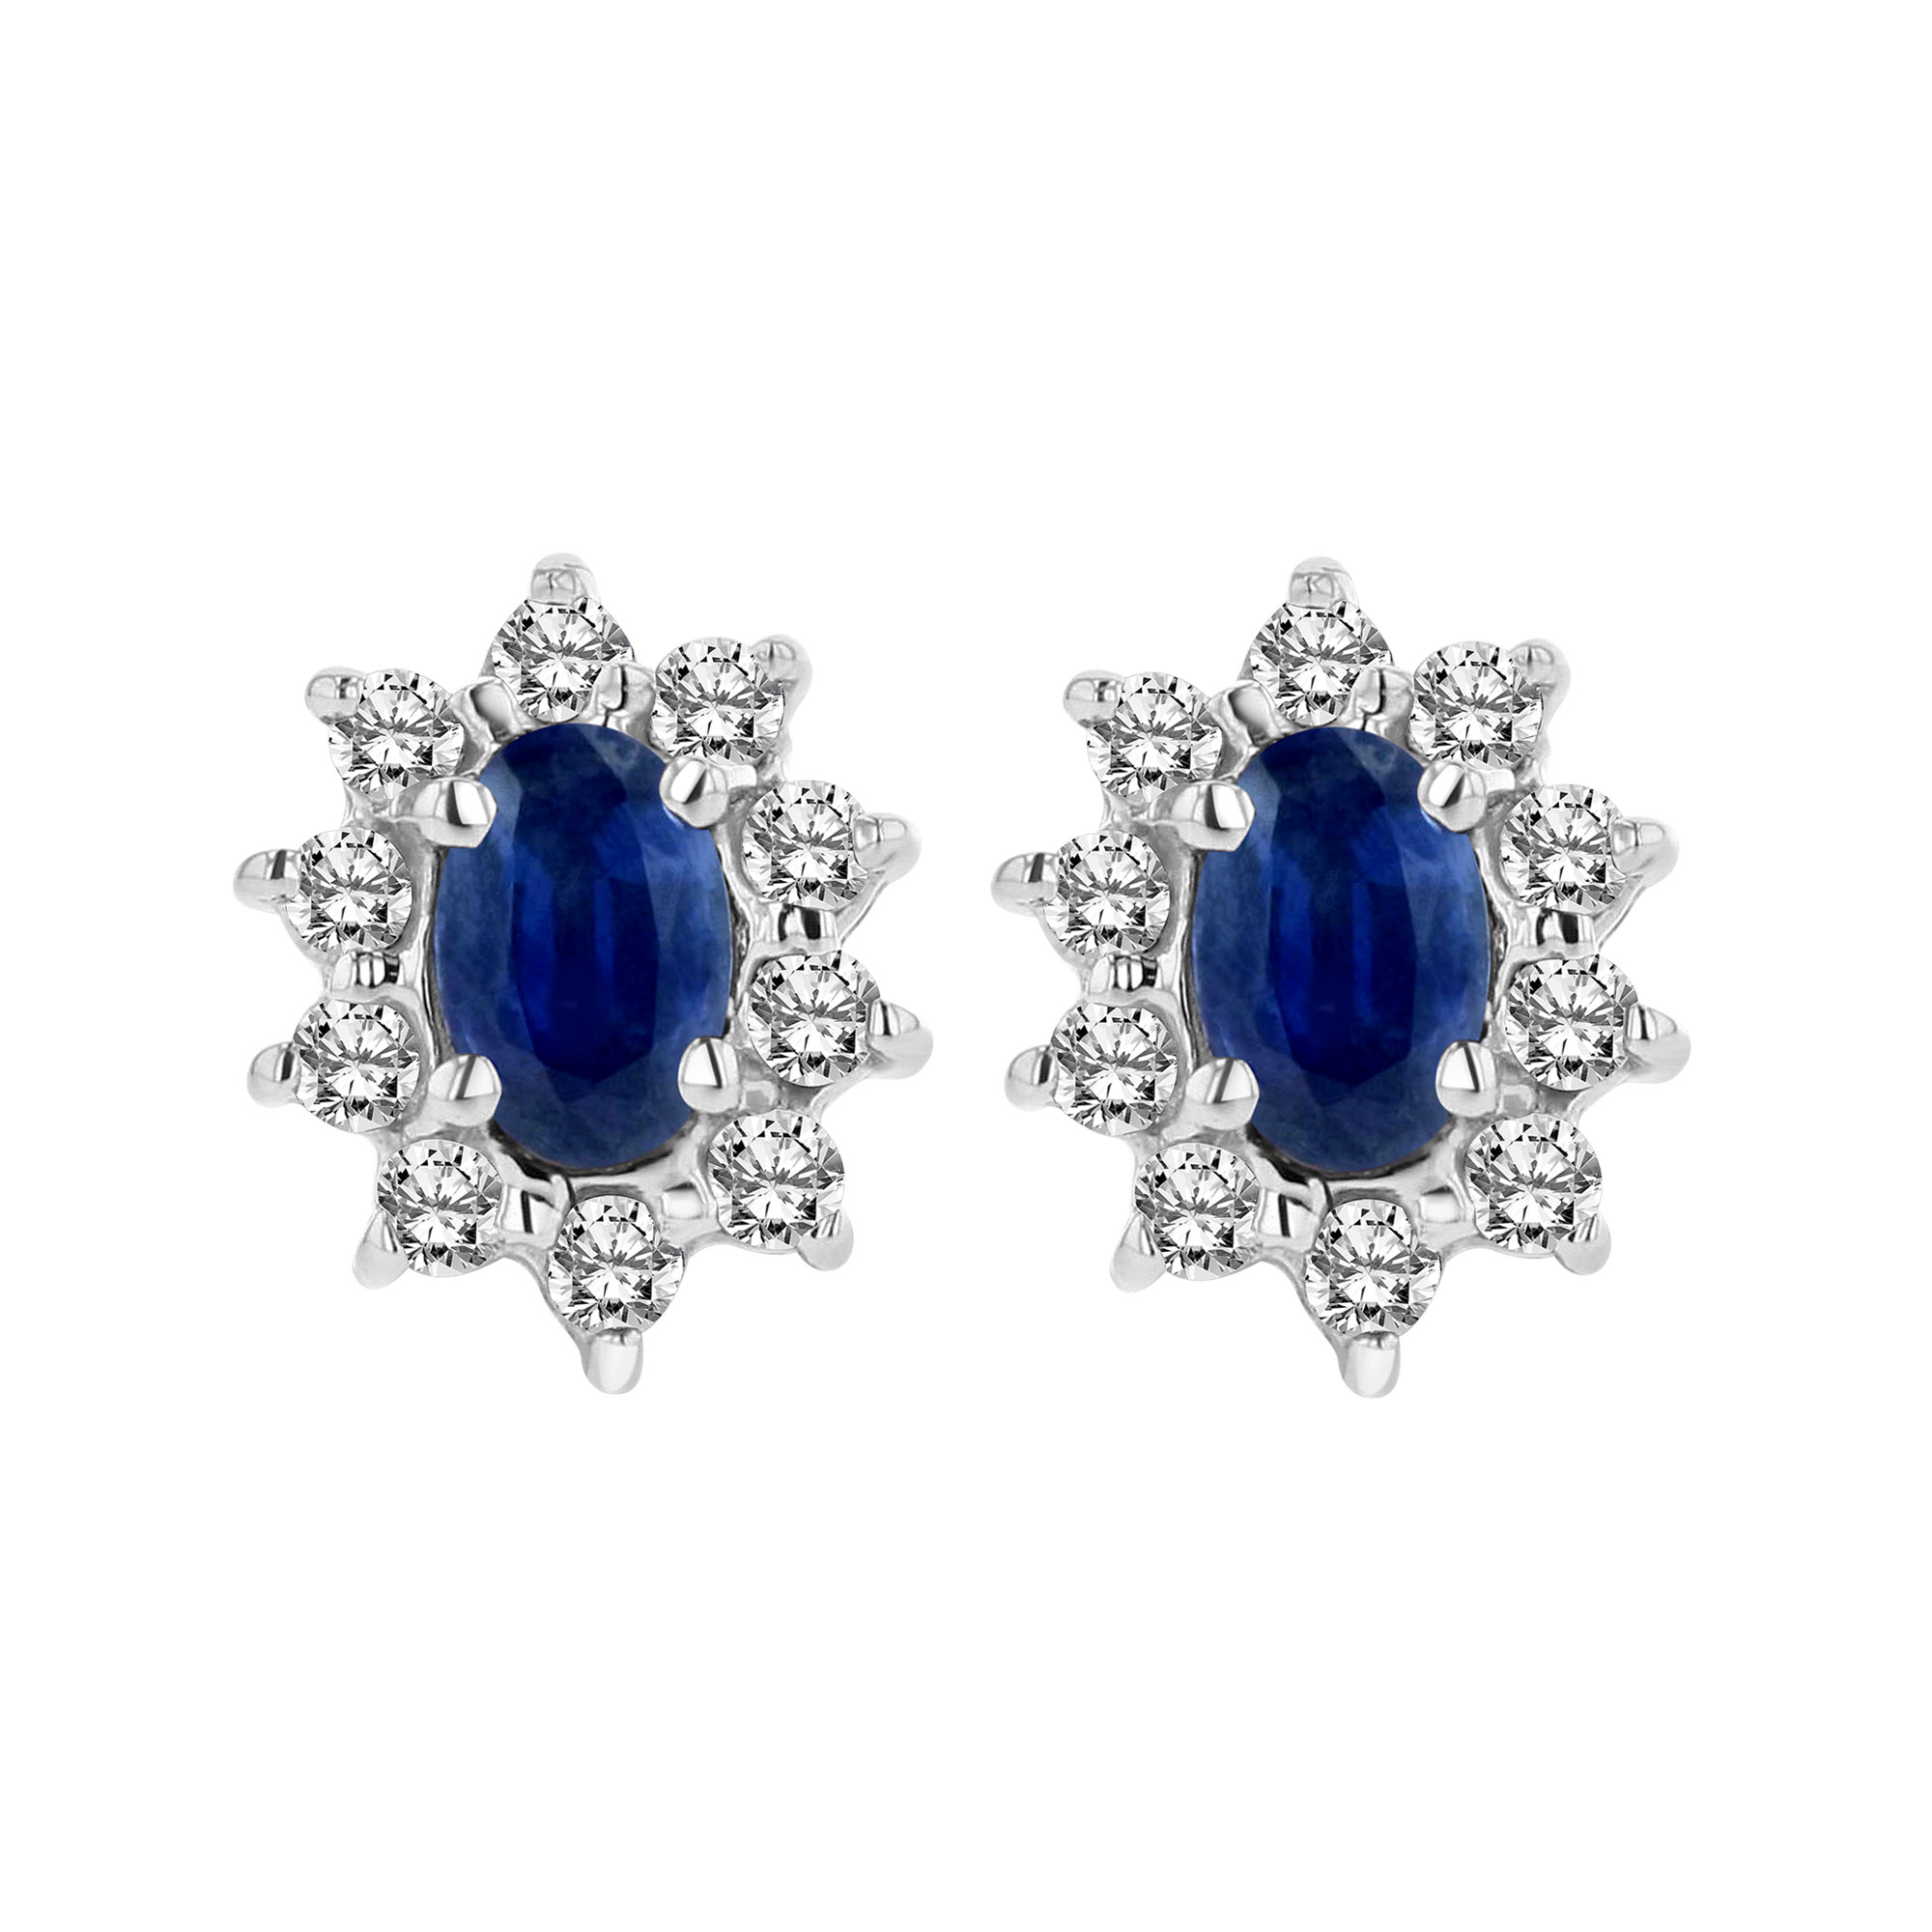 View 0.70cttw Diamond and Sapphire Earring in 14k Gold